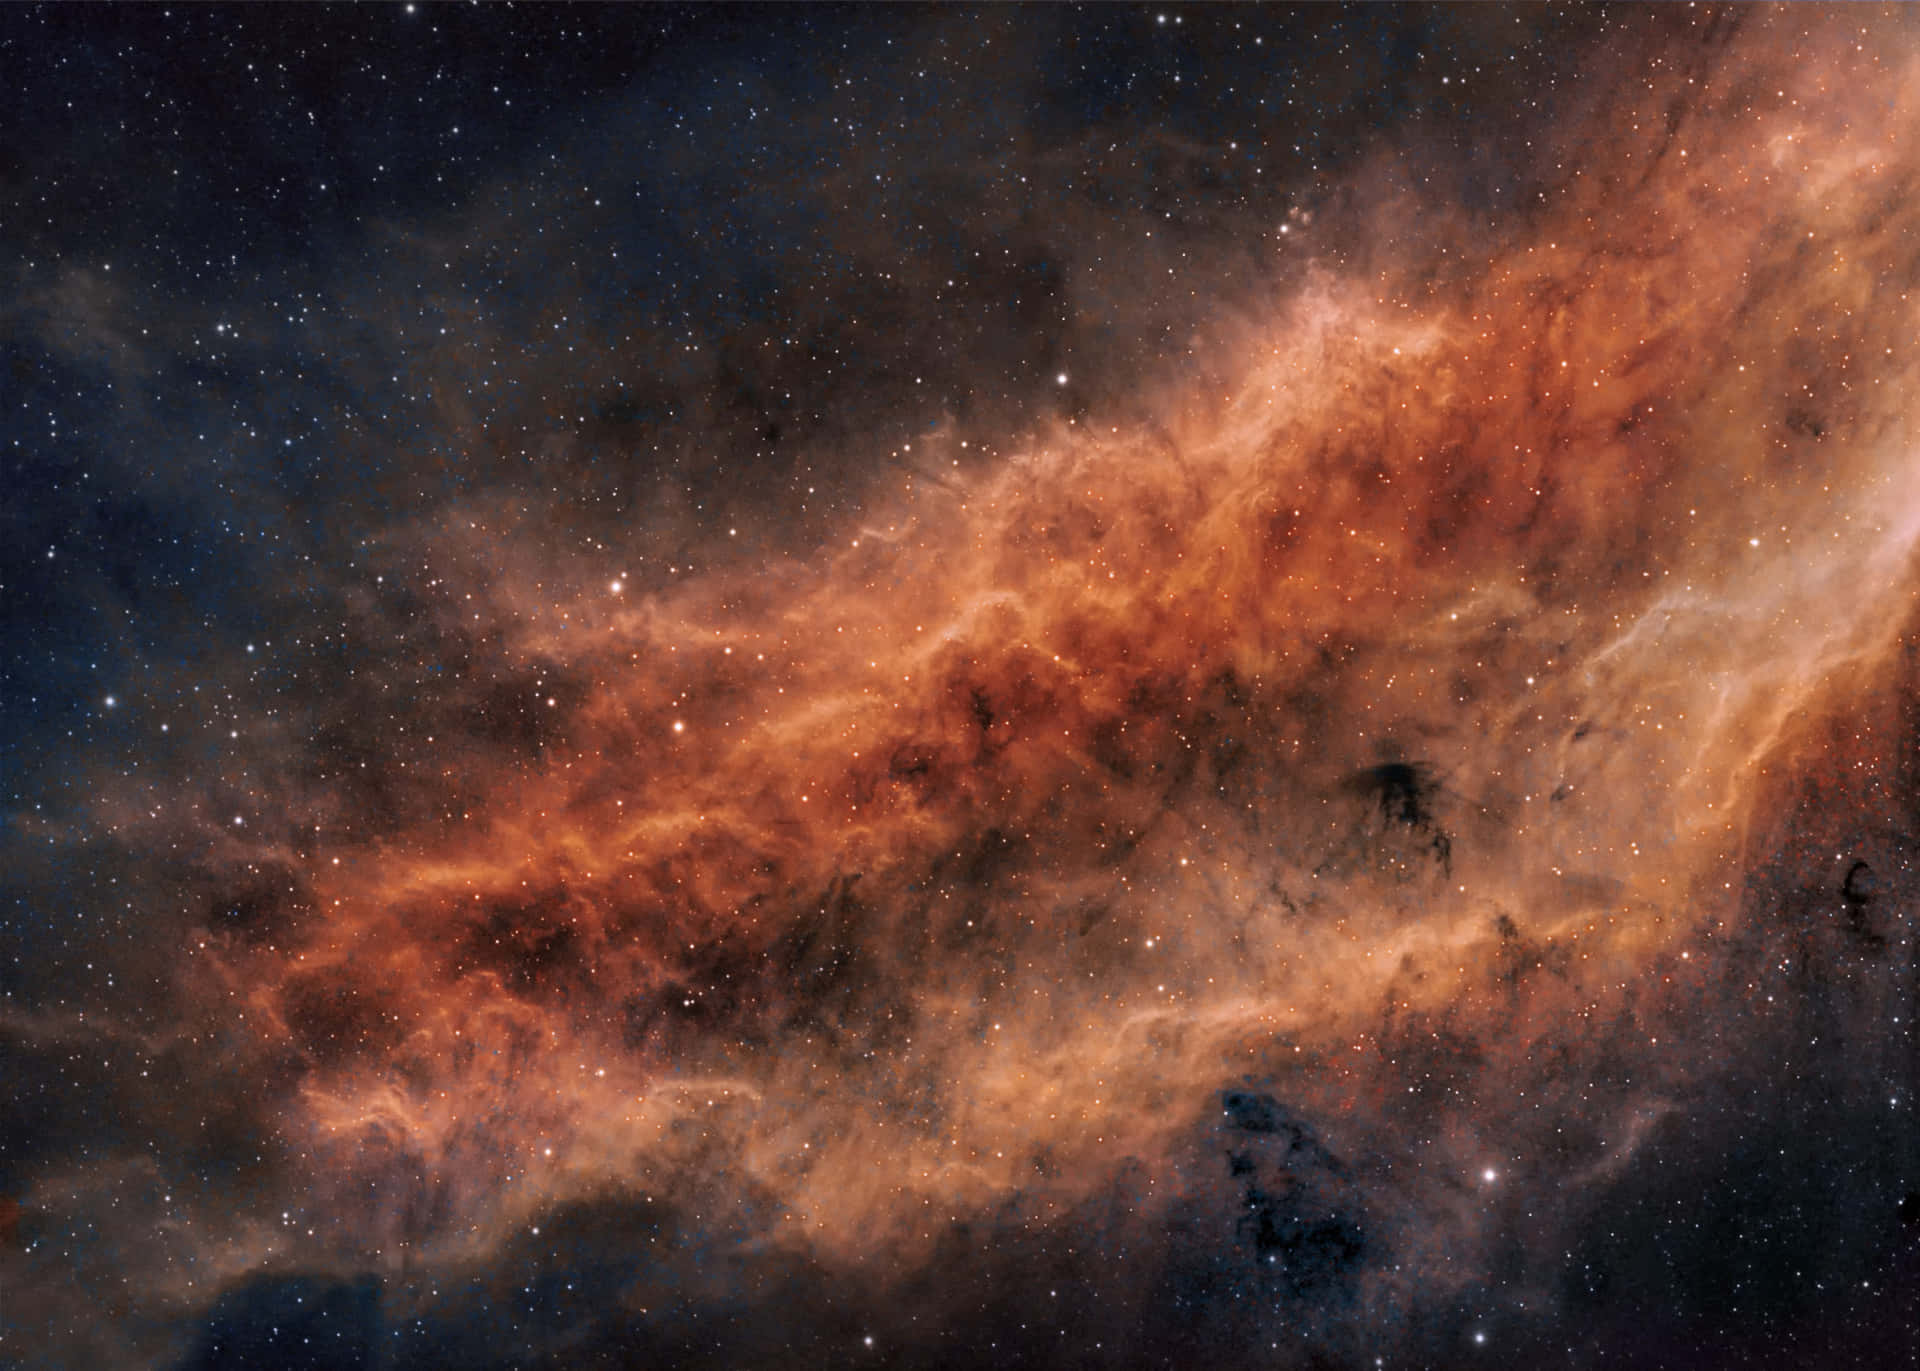 Caption: Mysterious Universe - A Mesmerizing Display of Cosmic Dust Wallpaper